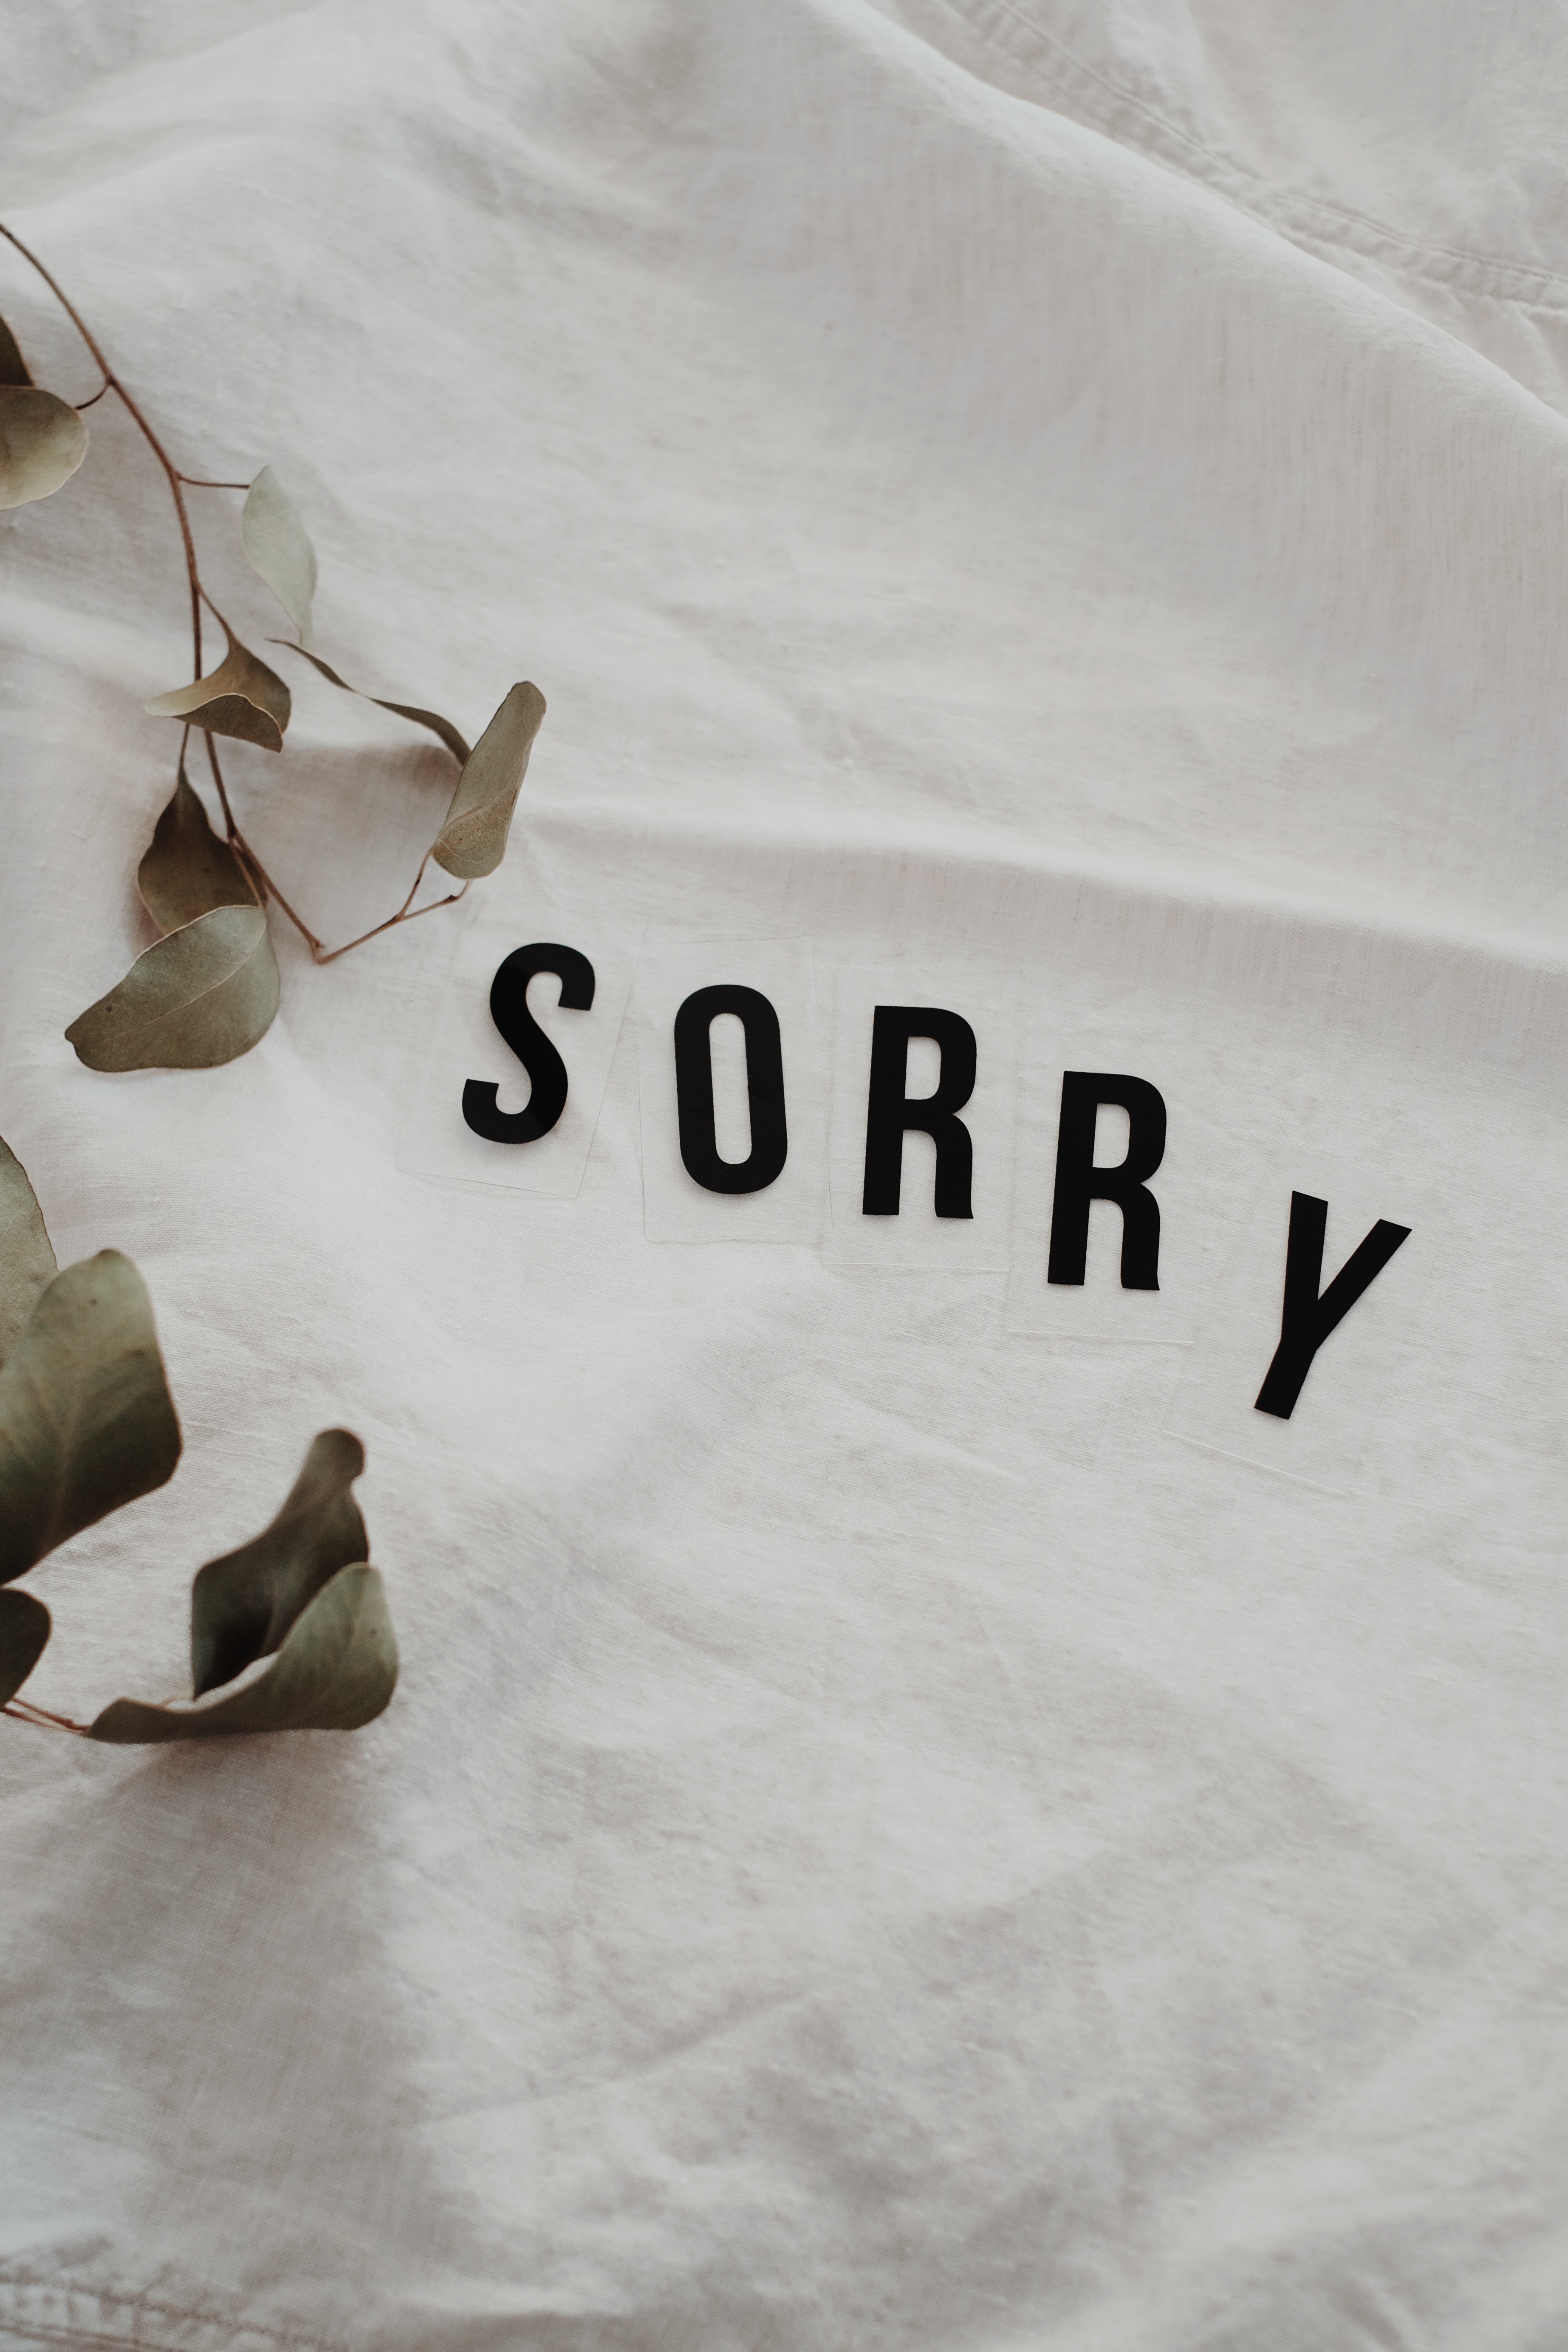 Apology photos download the best free apology stock photos hd images